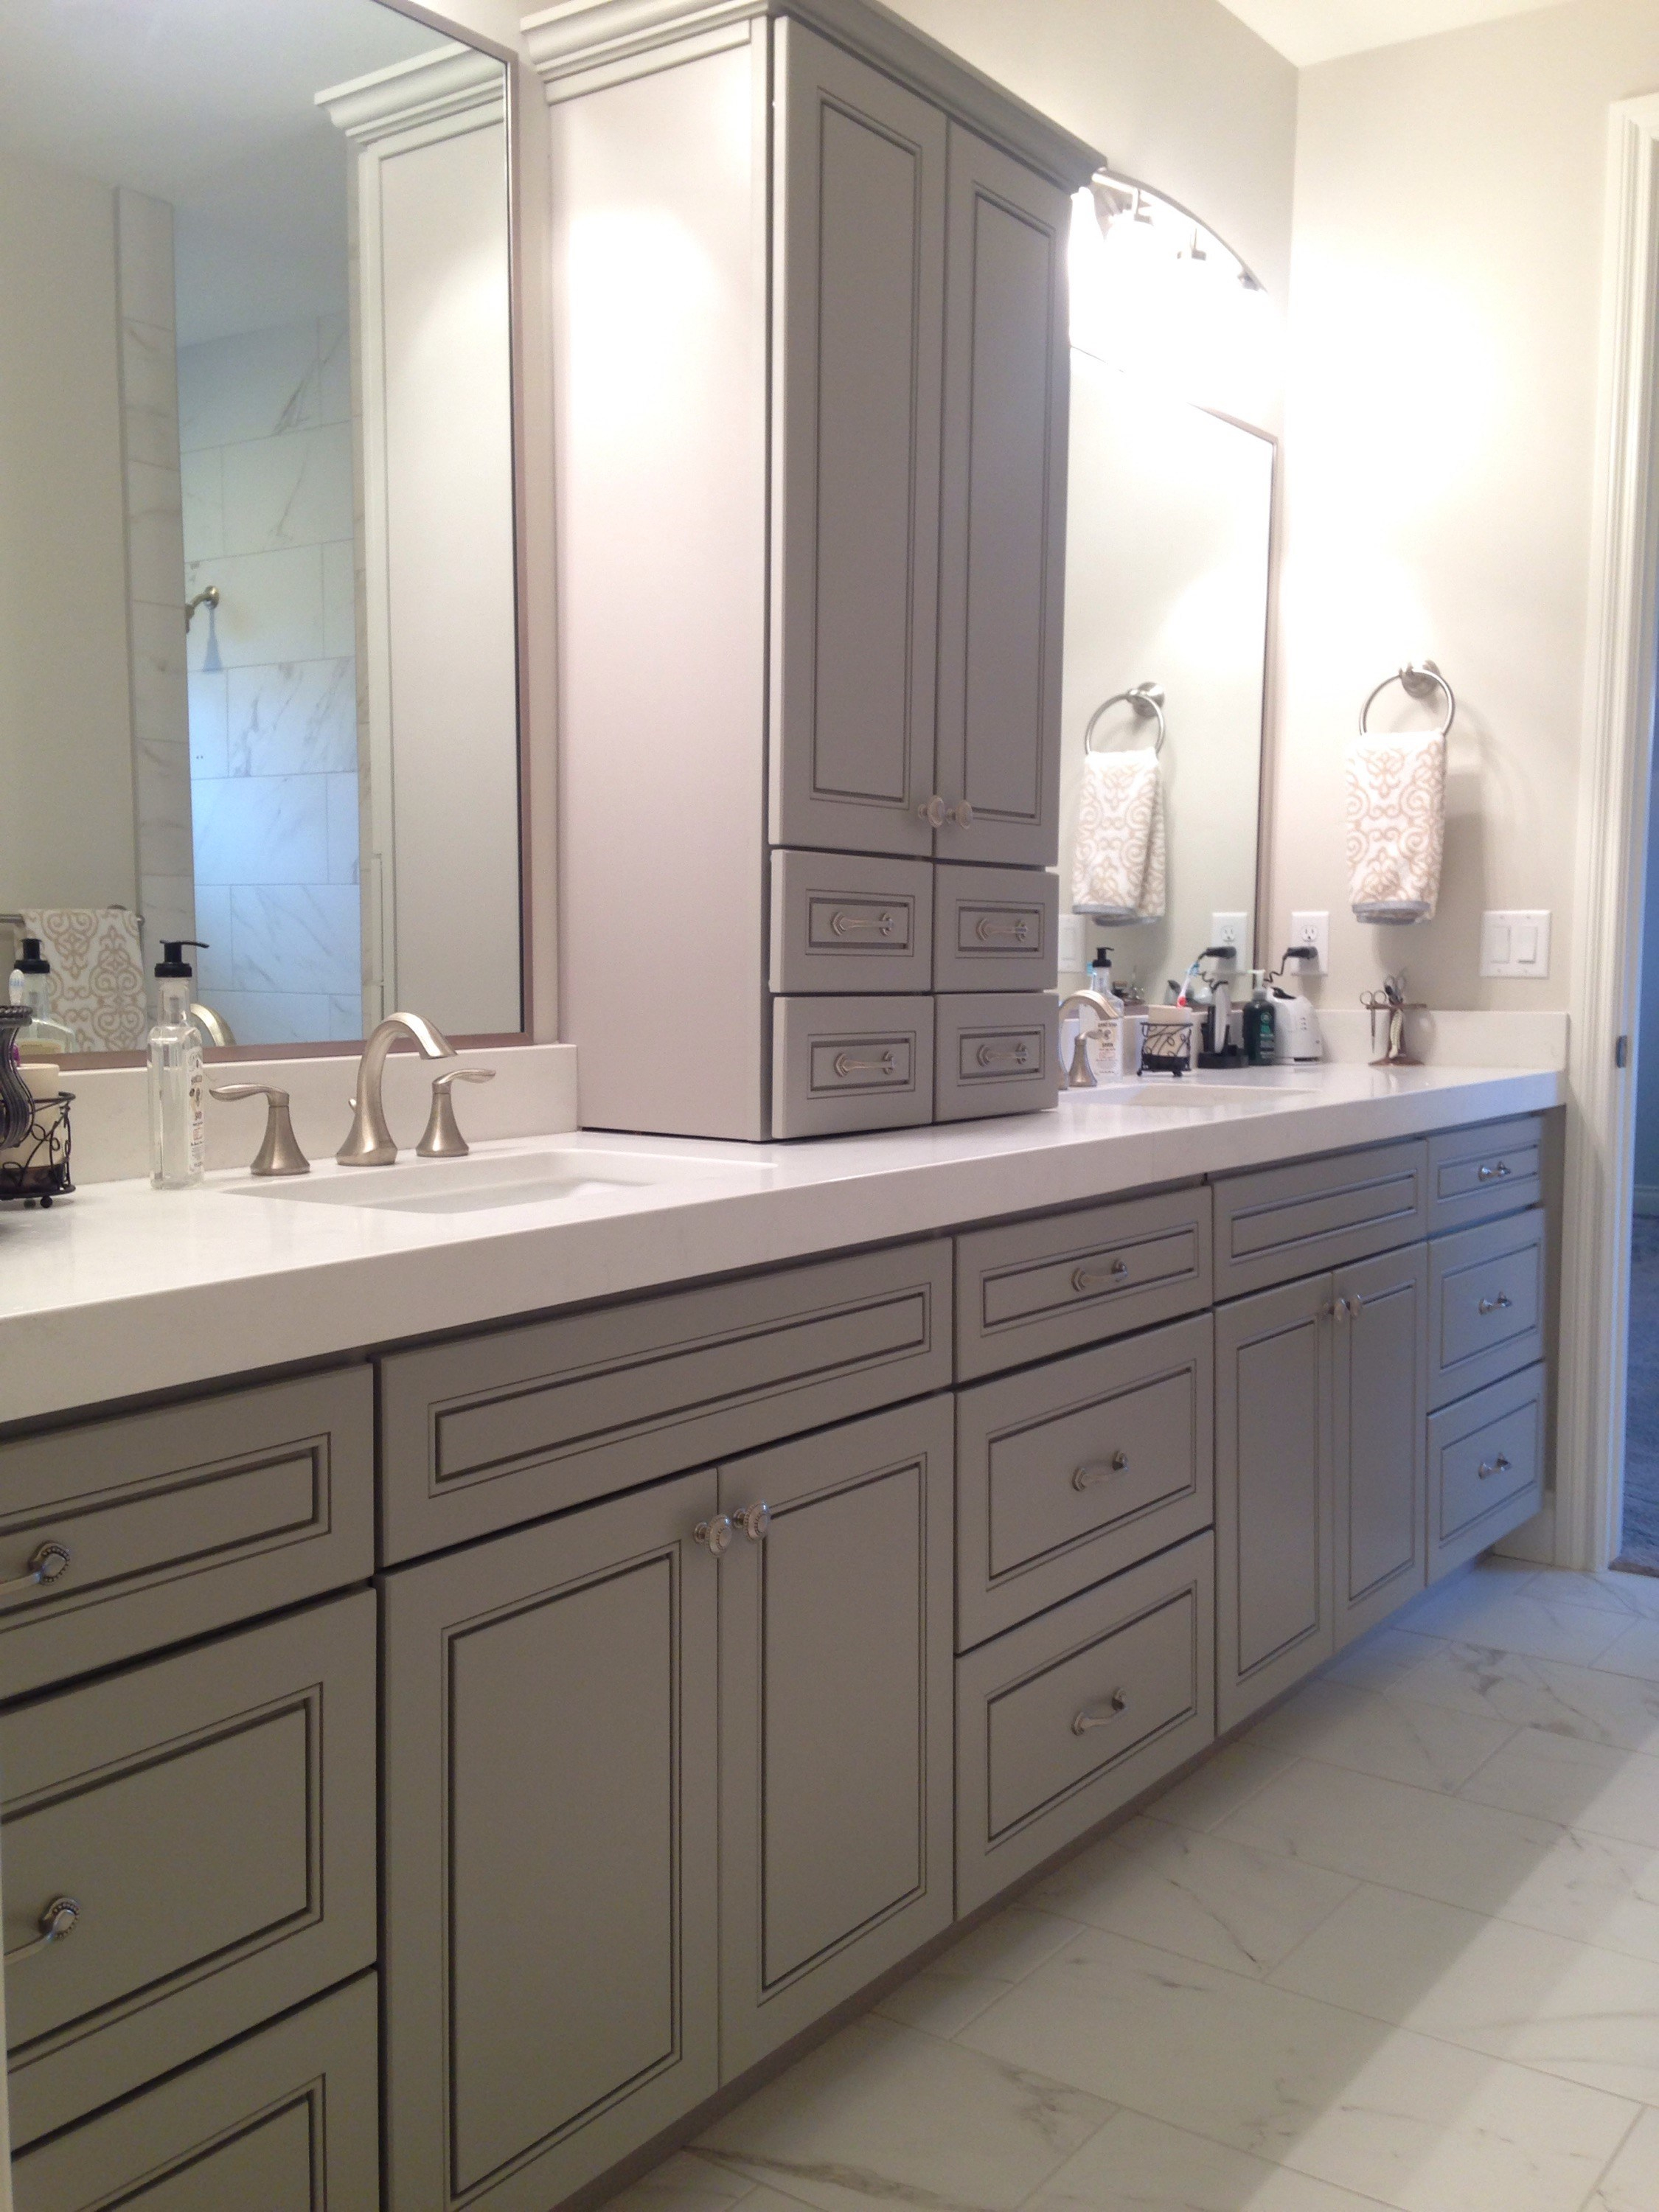 Bathroom Counter Cabinet O Is For Organize Under The Bathroom Sink within sizing 2250 X 3000